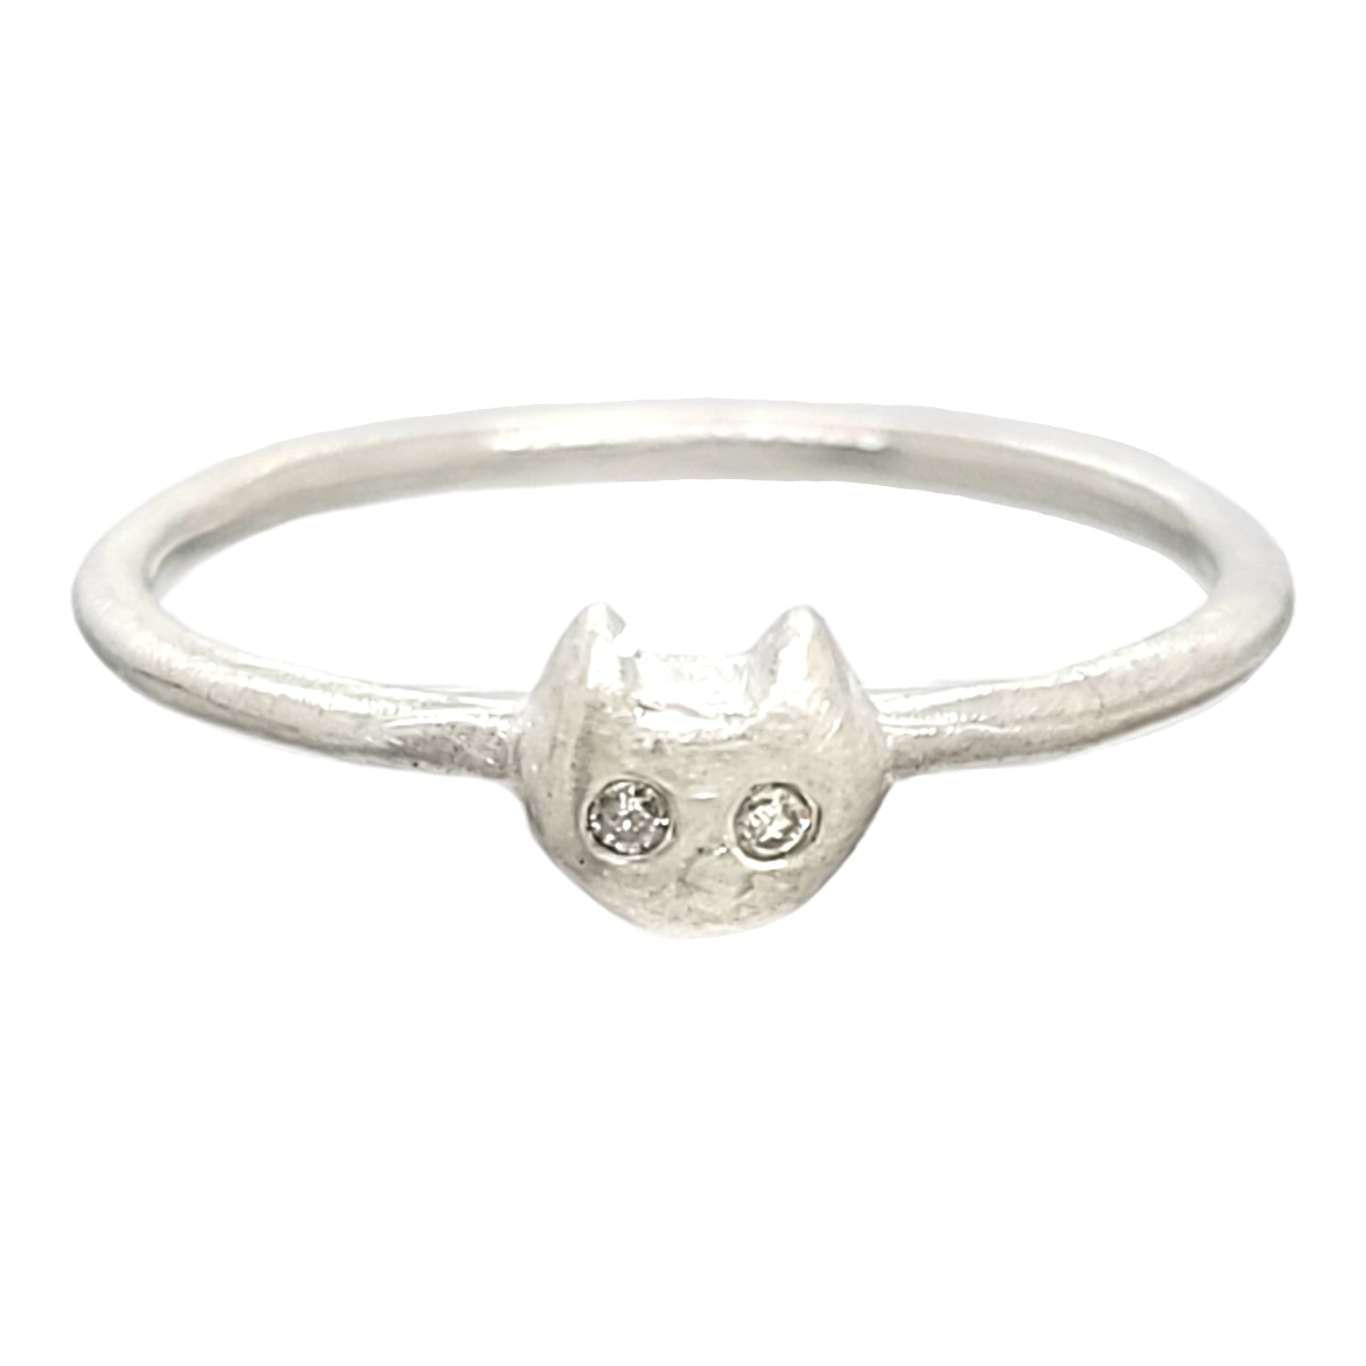 Ring - Diamond-Eyed Tiny Kitten Face in Sterling Silver by Michelle Chang